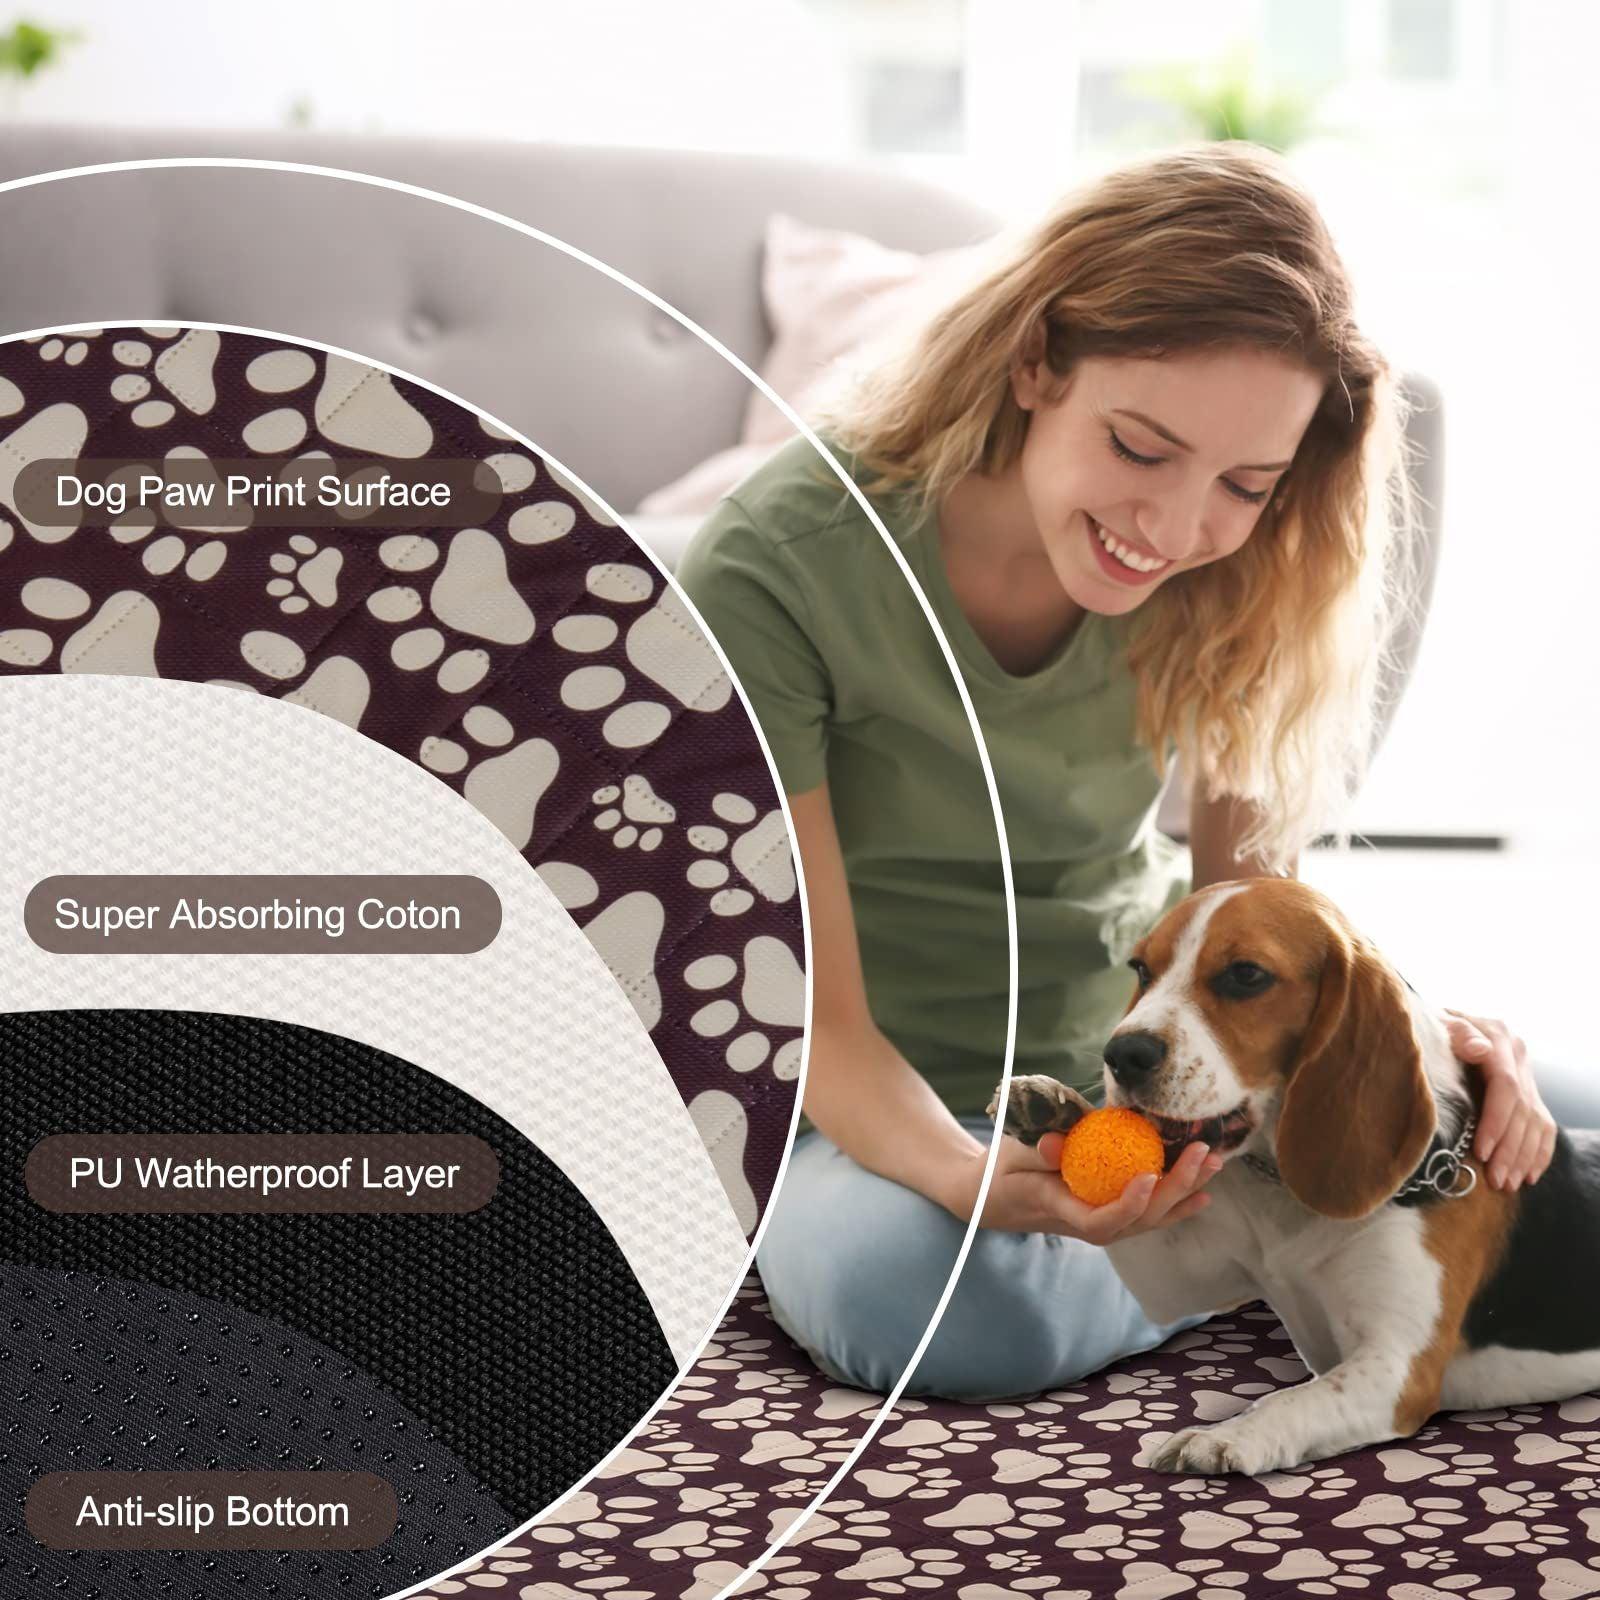 Dono Dog Training Pads Washable, 2 Pack Reusable Puppy Pads Large Medium Small, Waterproof Pet Whelping Incontinence Pee Pads,Upgrade Fast Absorbent non slip Mat for Indoor/Outdoor/Car/Travel 3